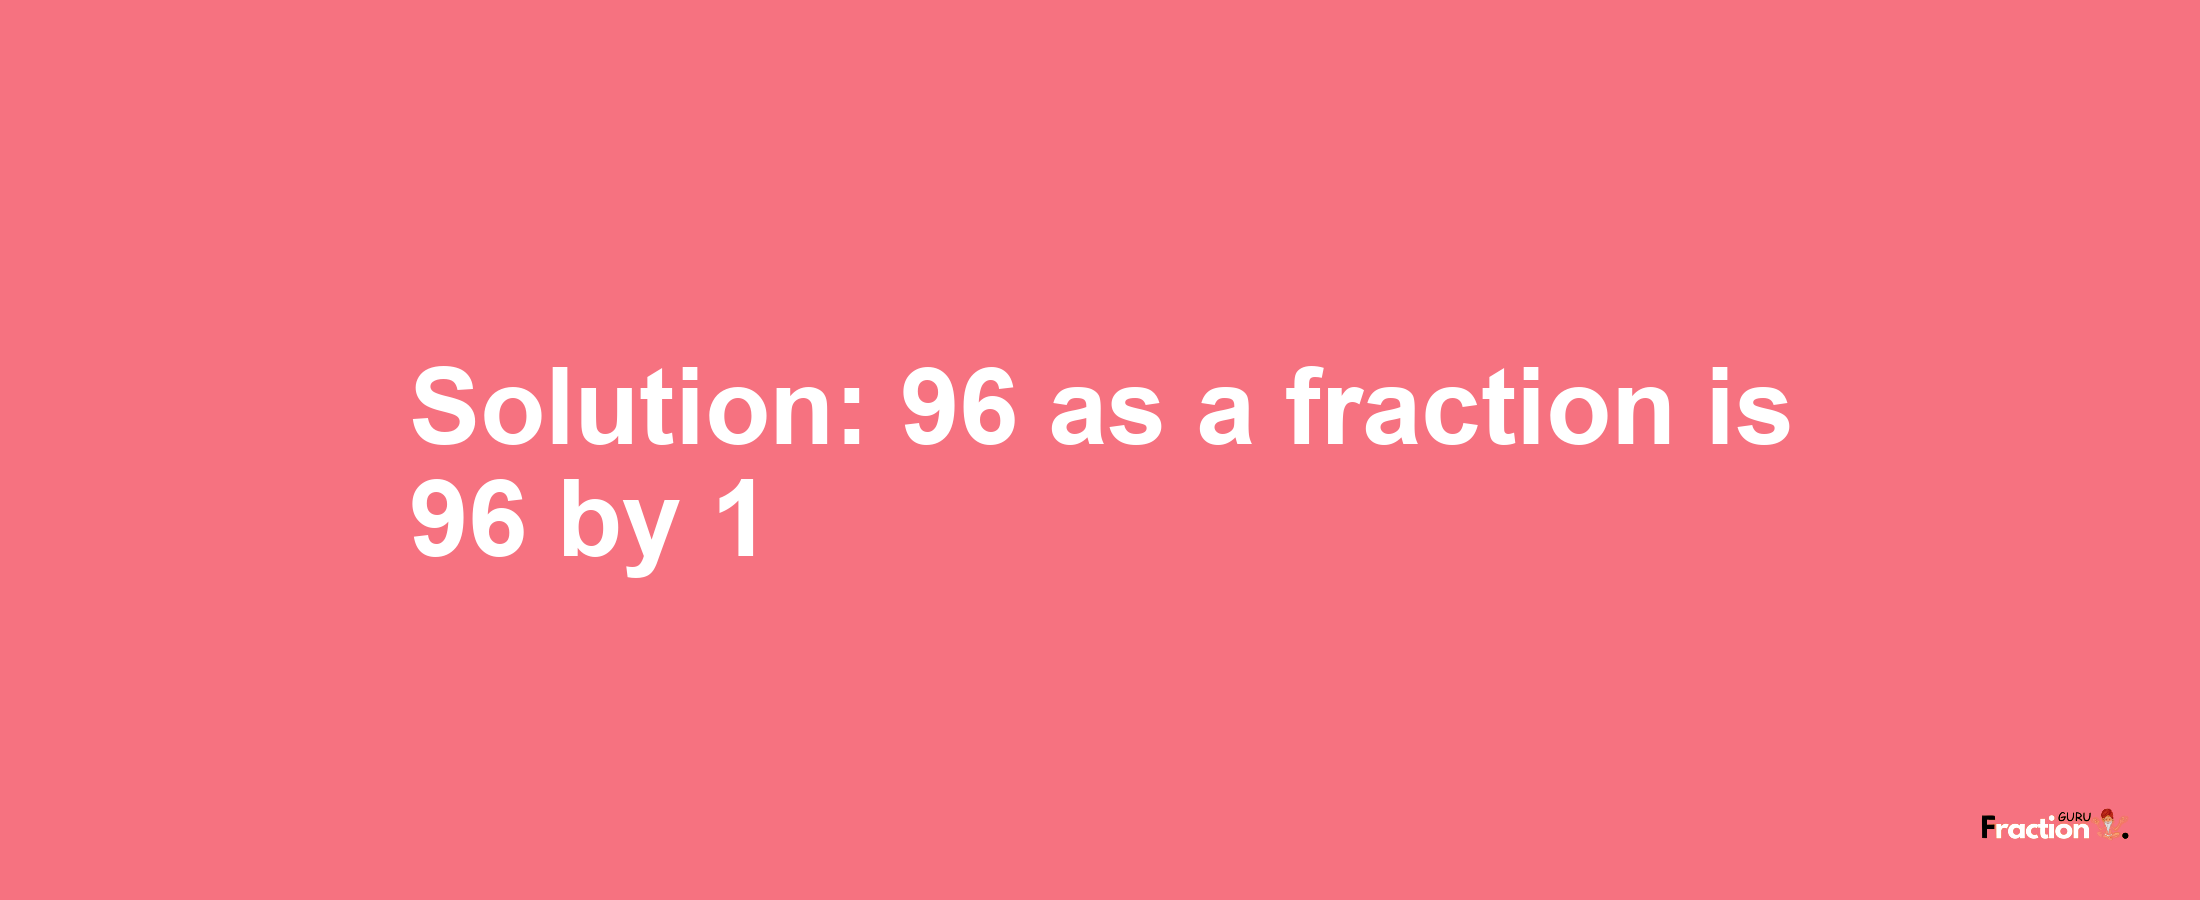 Solution:96 as a fraction is 96/1